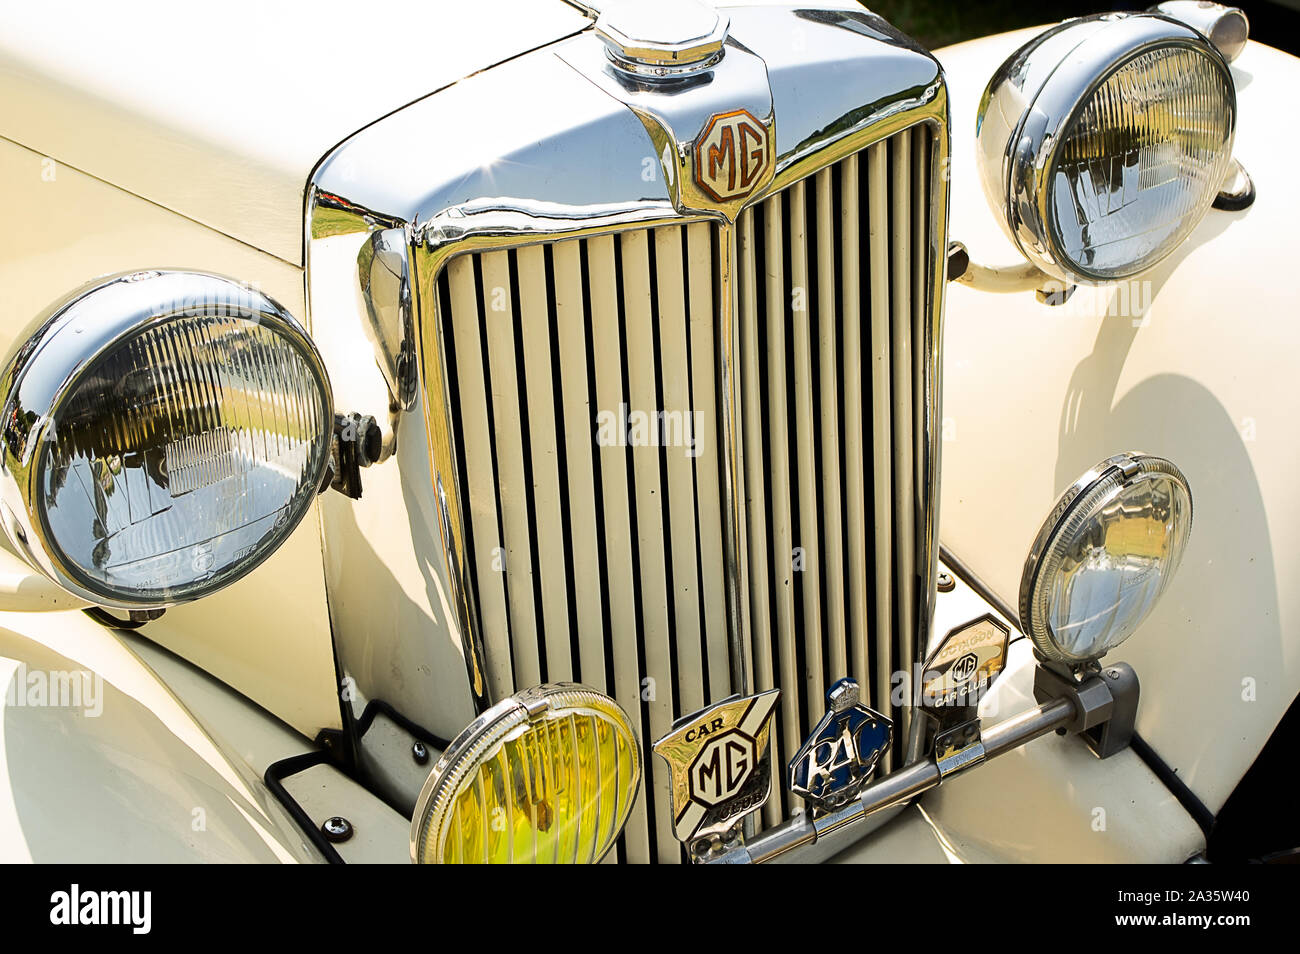 The front of a white 1952 MG TD roadster on display at a car show Stock Photo